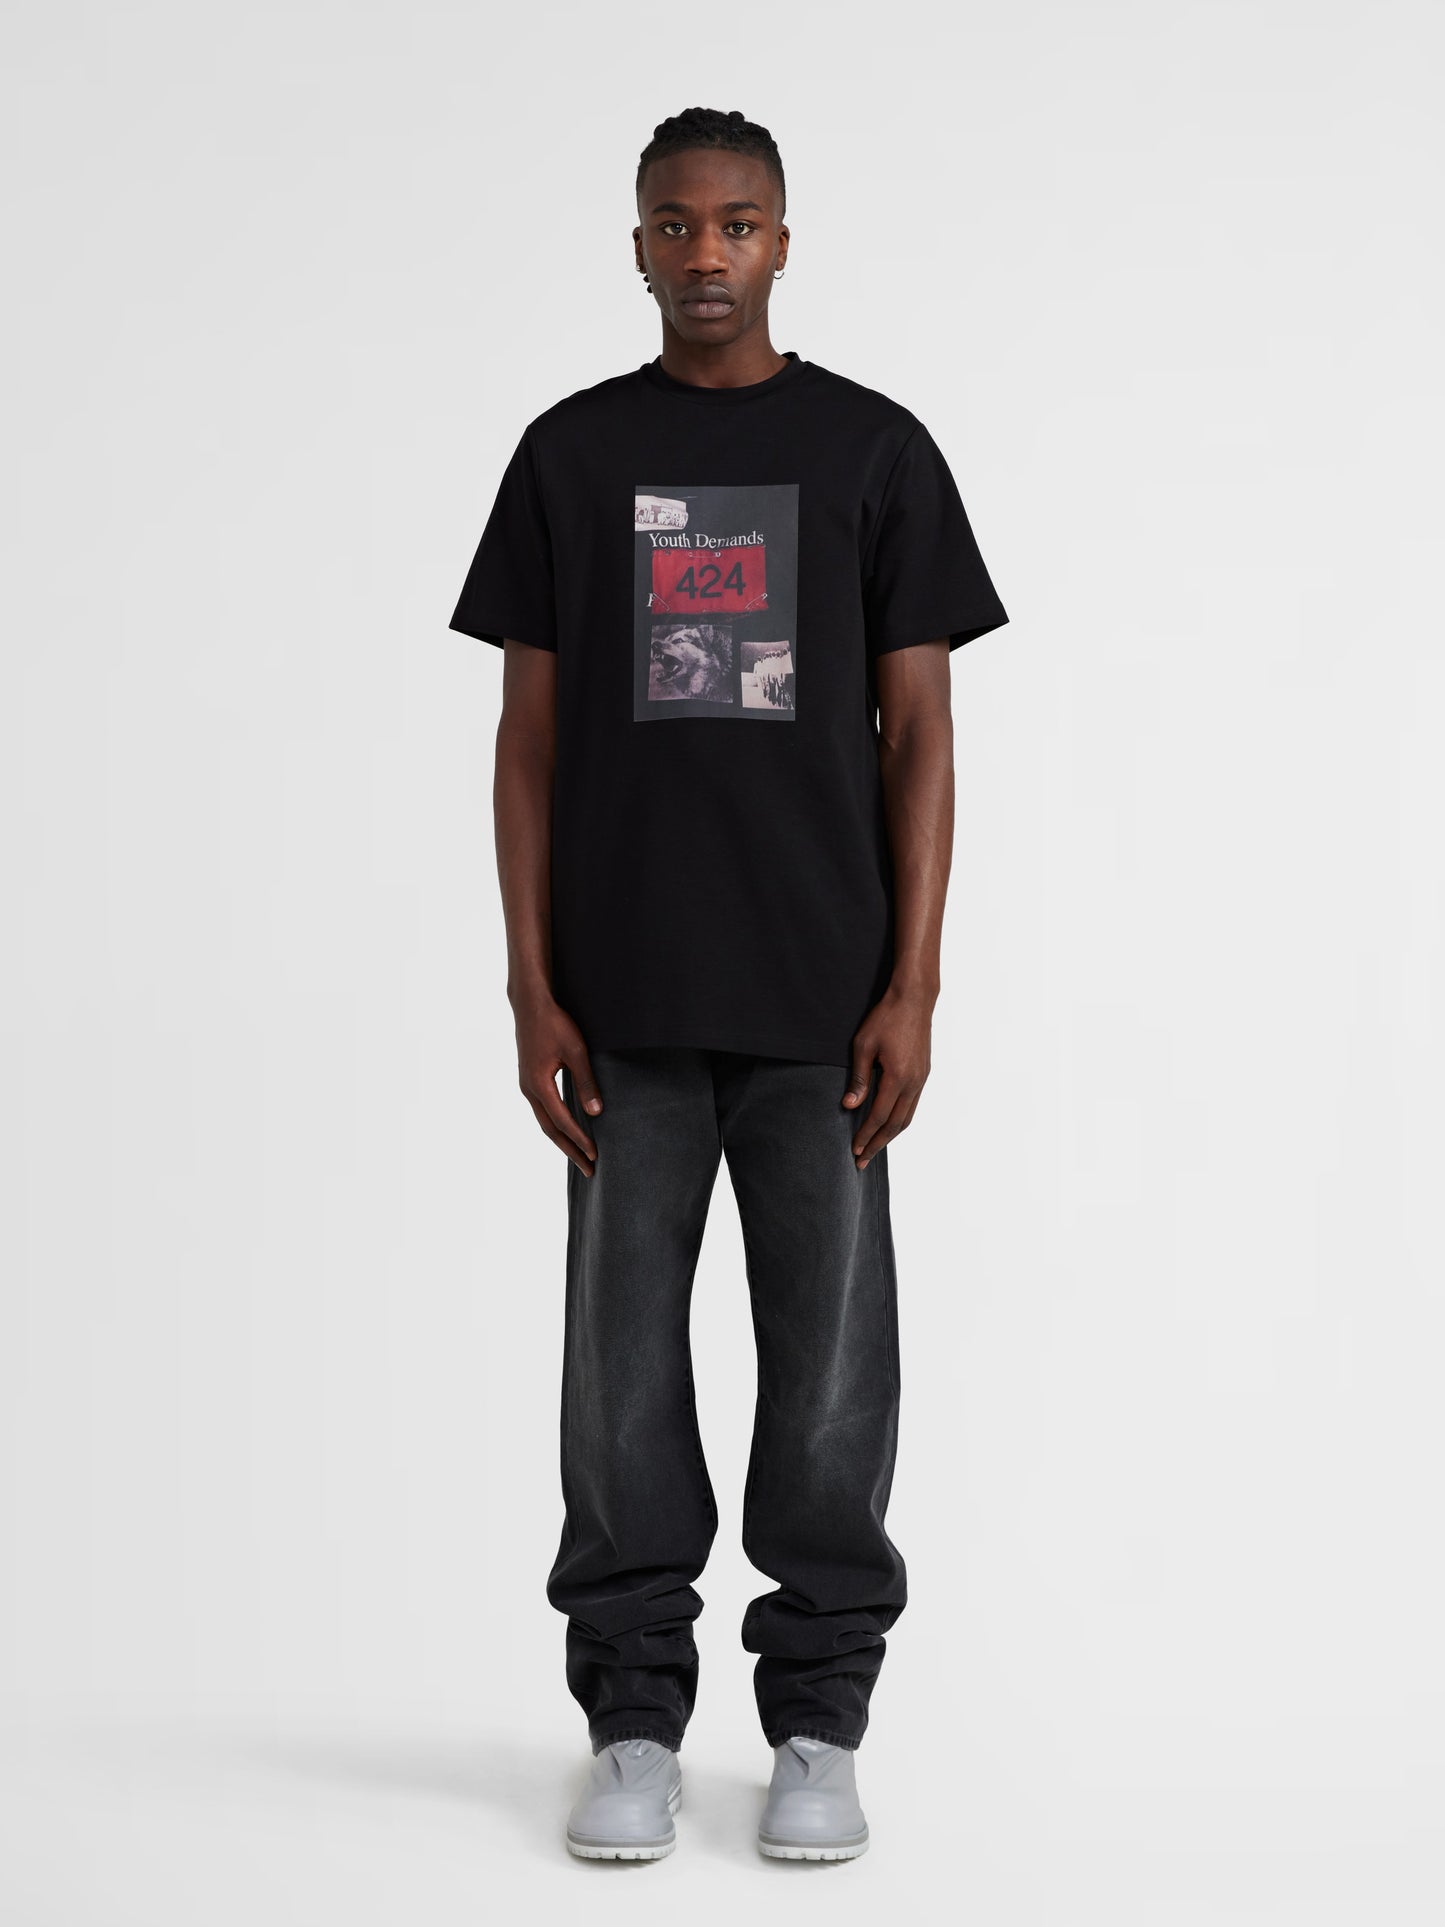 BLACK "YOUTH DEMANDS" GRAPHIC TEE